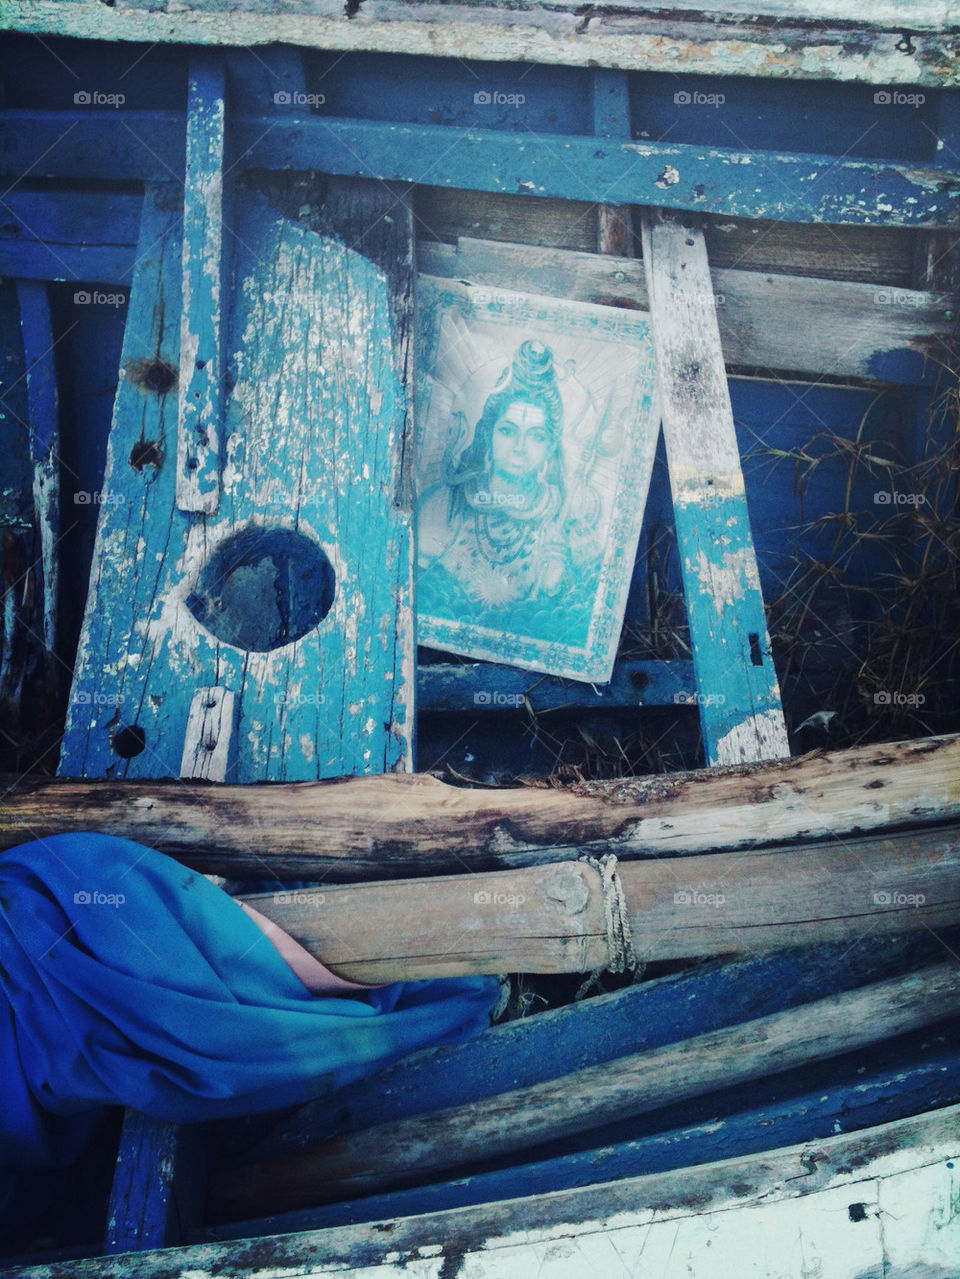 Faded Indian poster in a weathered blue boat